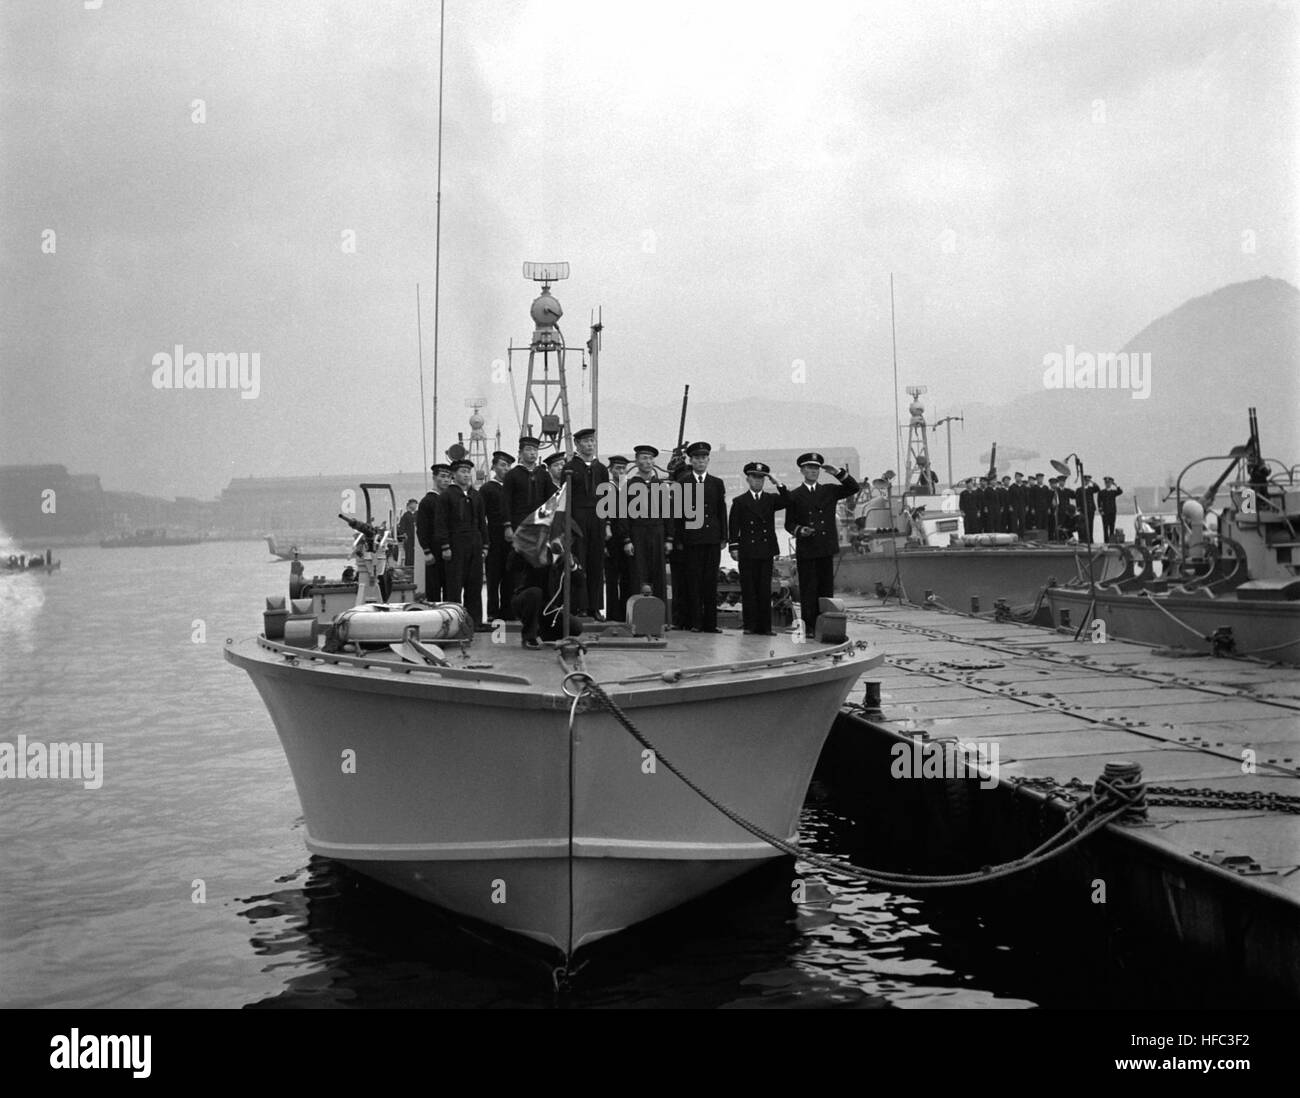 Personnel of ROK Navy stand at attention on board PT boat while Korean nationa anthem is played .  Four patrol torpedo boats were added to ROK Navy when V.Adm. Won IL Sohn, ROKN, accepted the vessels from U.S. Naval authorities in Sasebo, Japan.  The transfer was made by R.Adm. George C. Dyer, USN. NARA FILE #:  80-G-438008 HN-SN-98-07196 Stock Photo